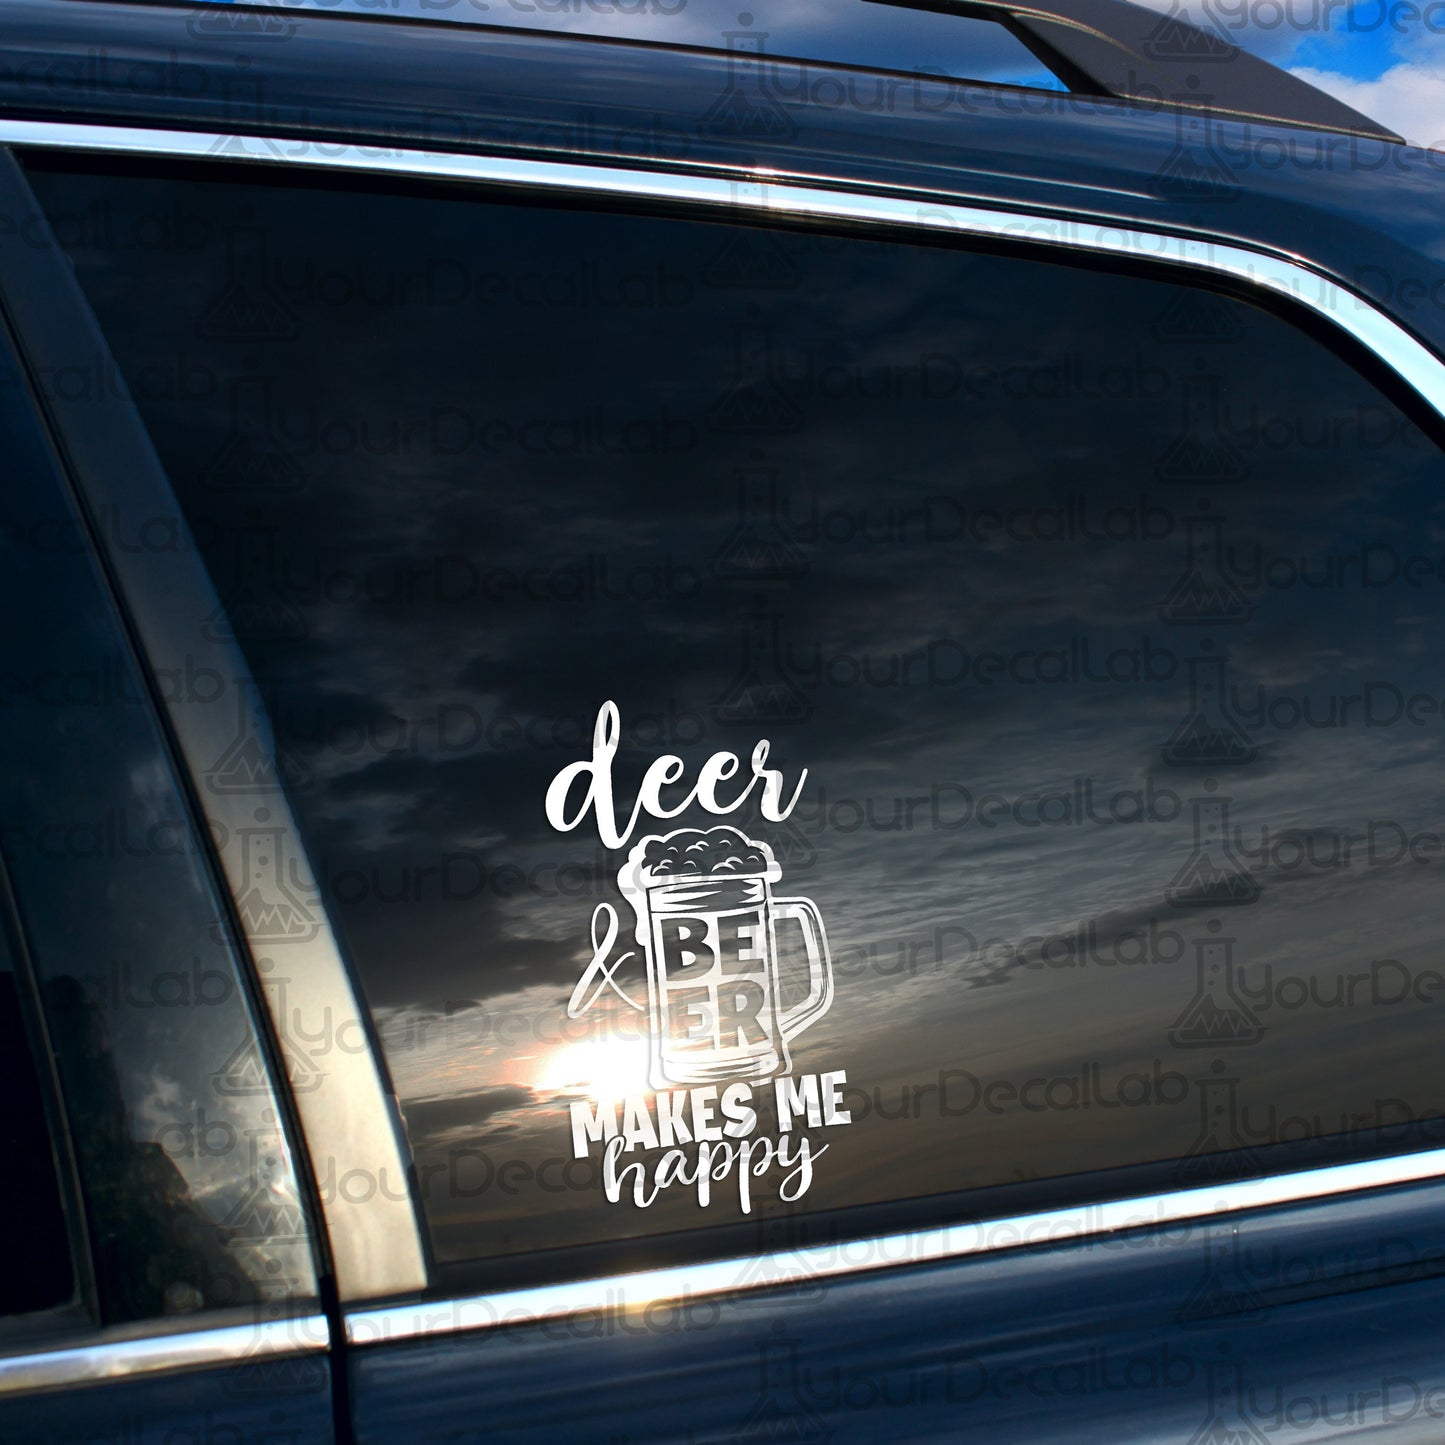 a car with a decal that says deer makes me happy